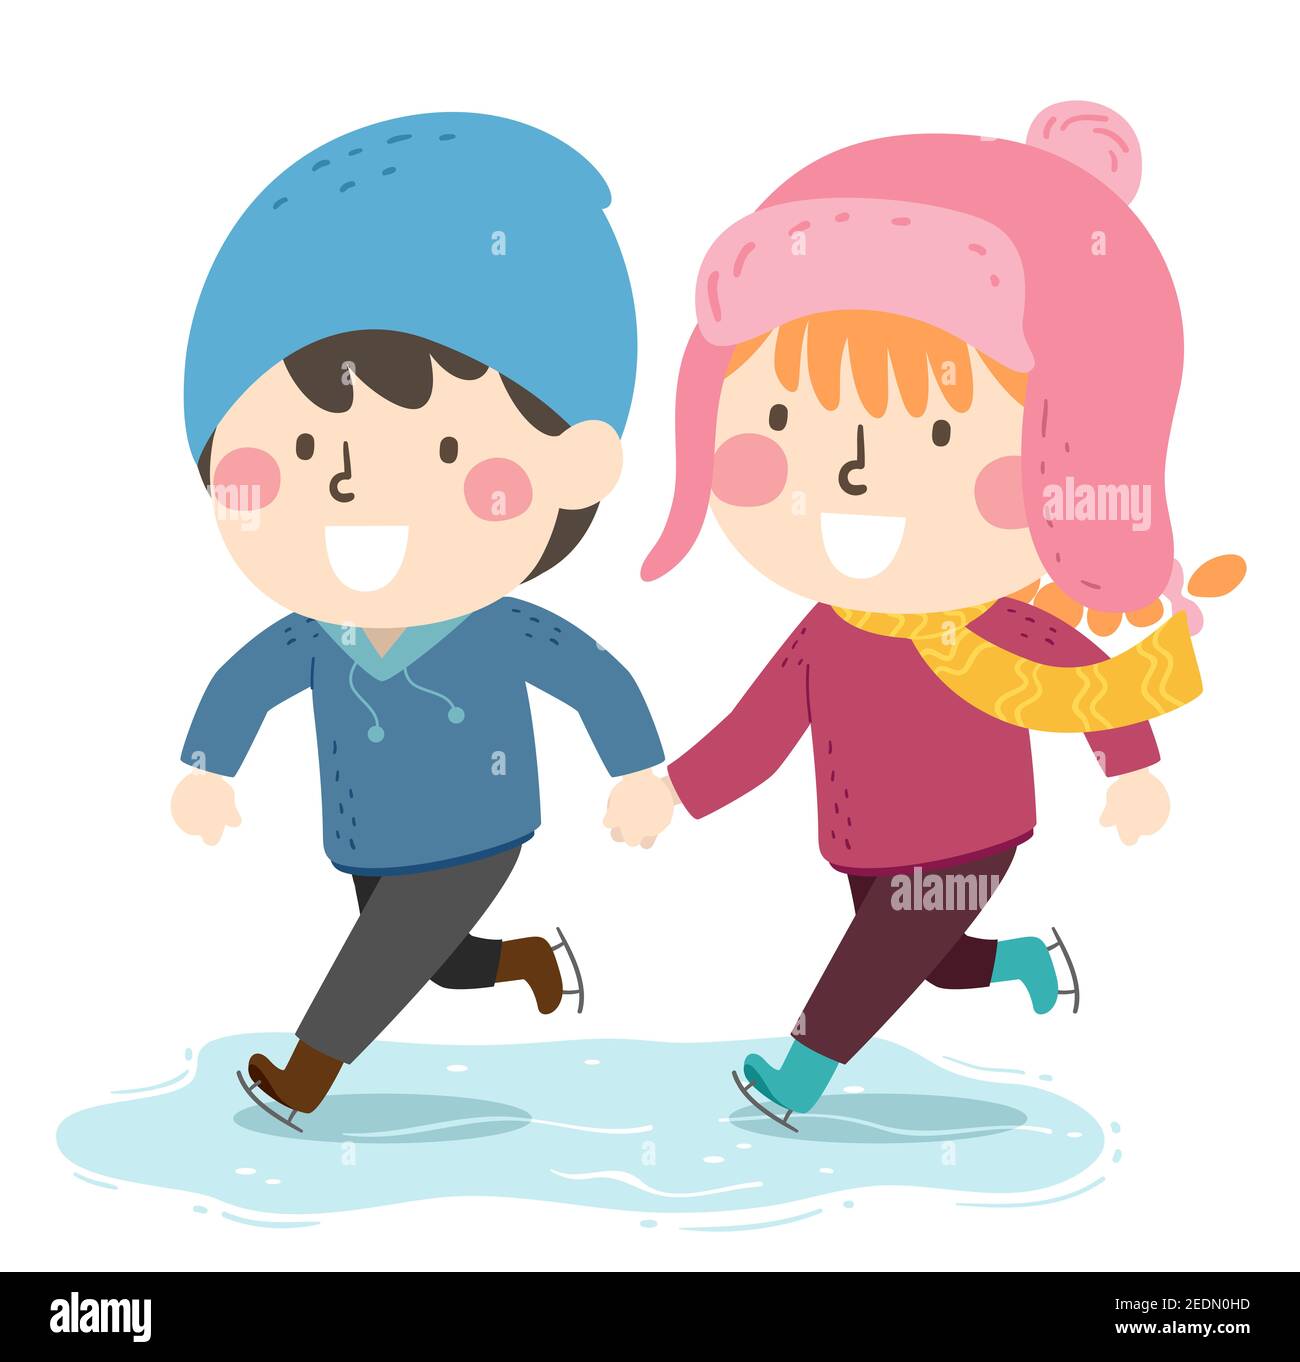 Illustration of Kids Holding Hands and Ice Skating During Winter Stock Photo